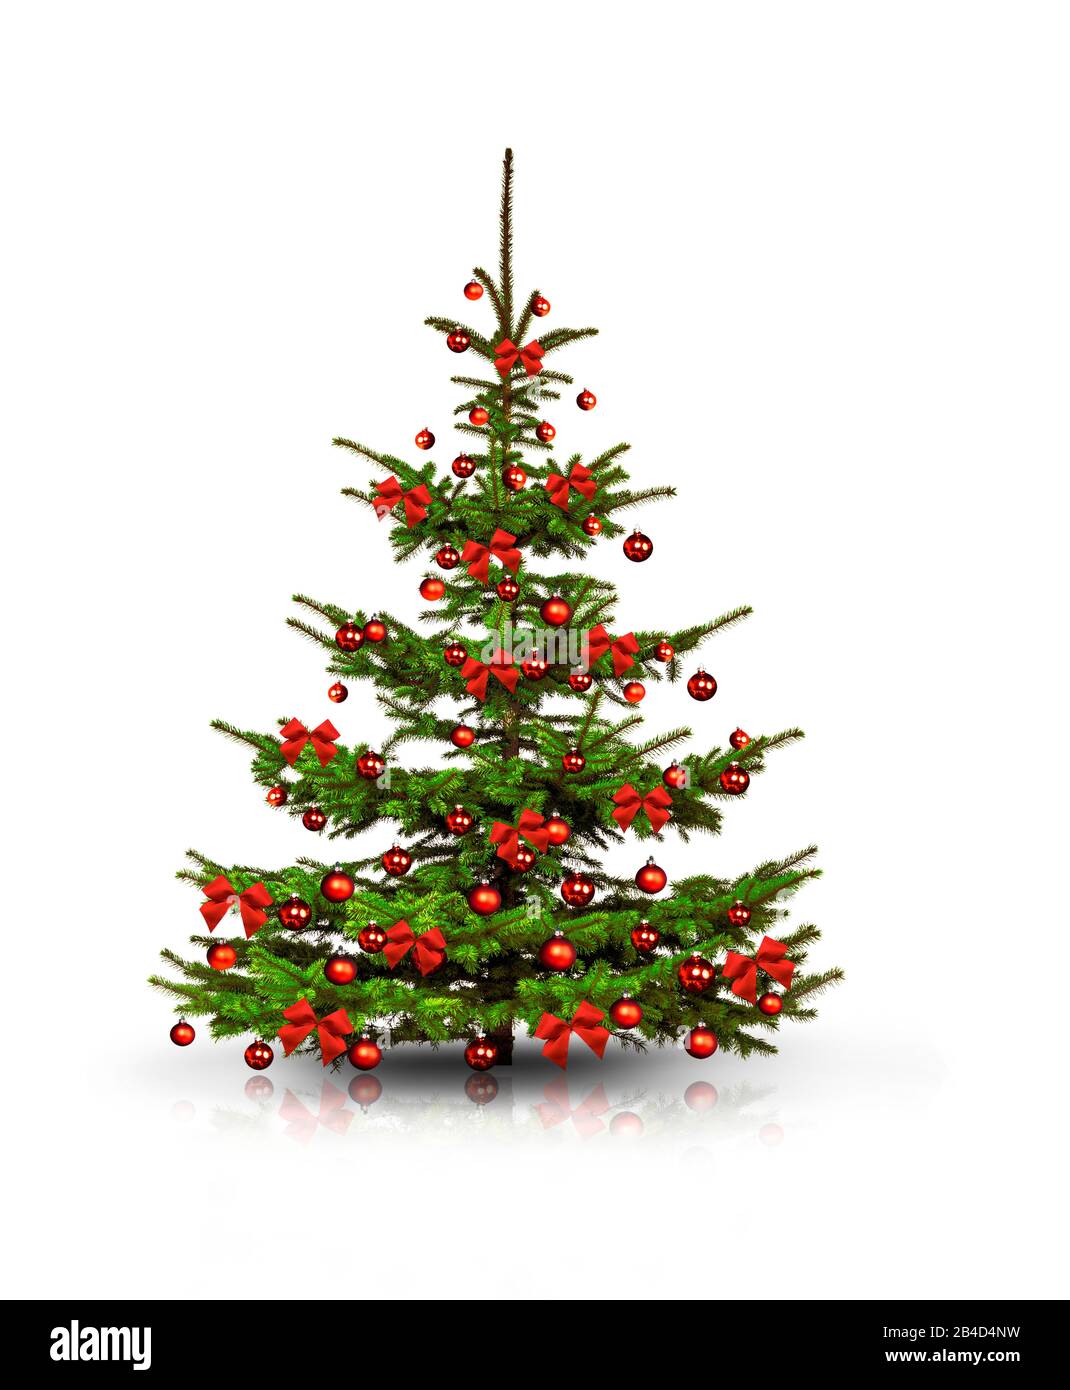 Beautifully decorated Christmas tree with red bows and red Christmas tree balls Stock Photo